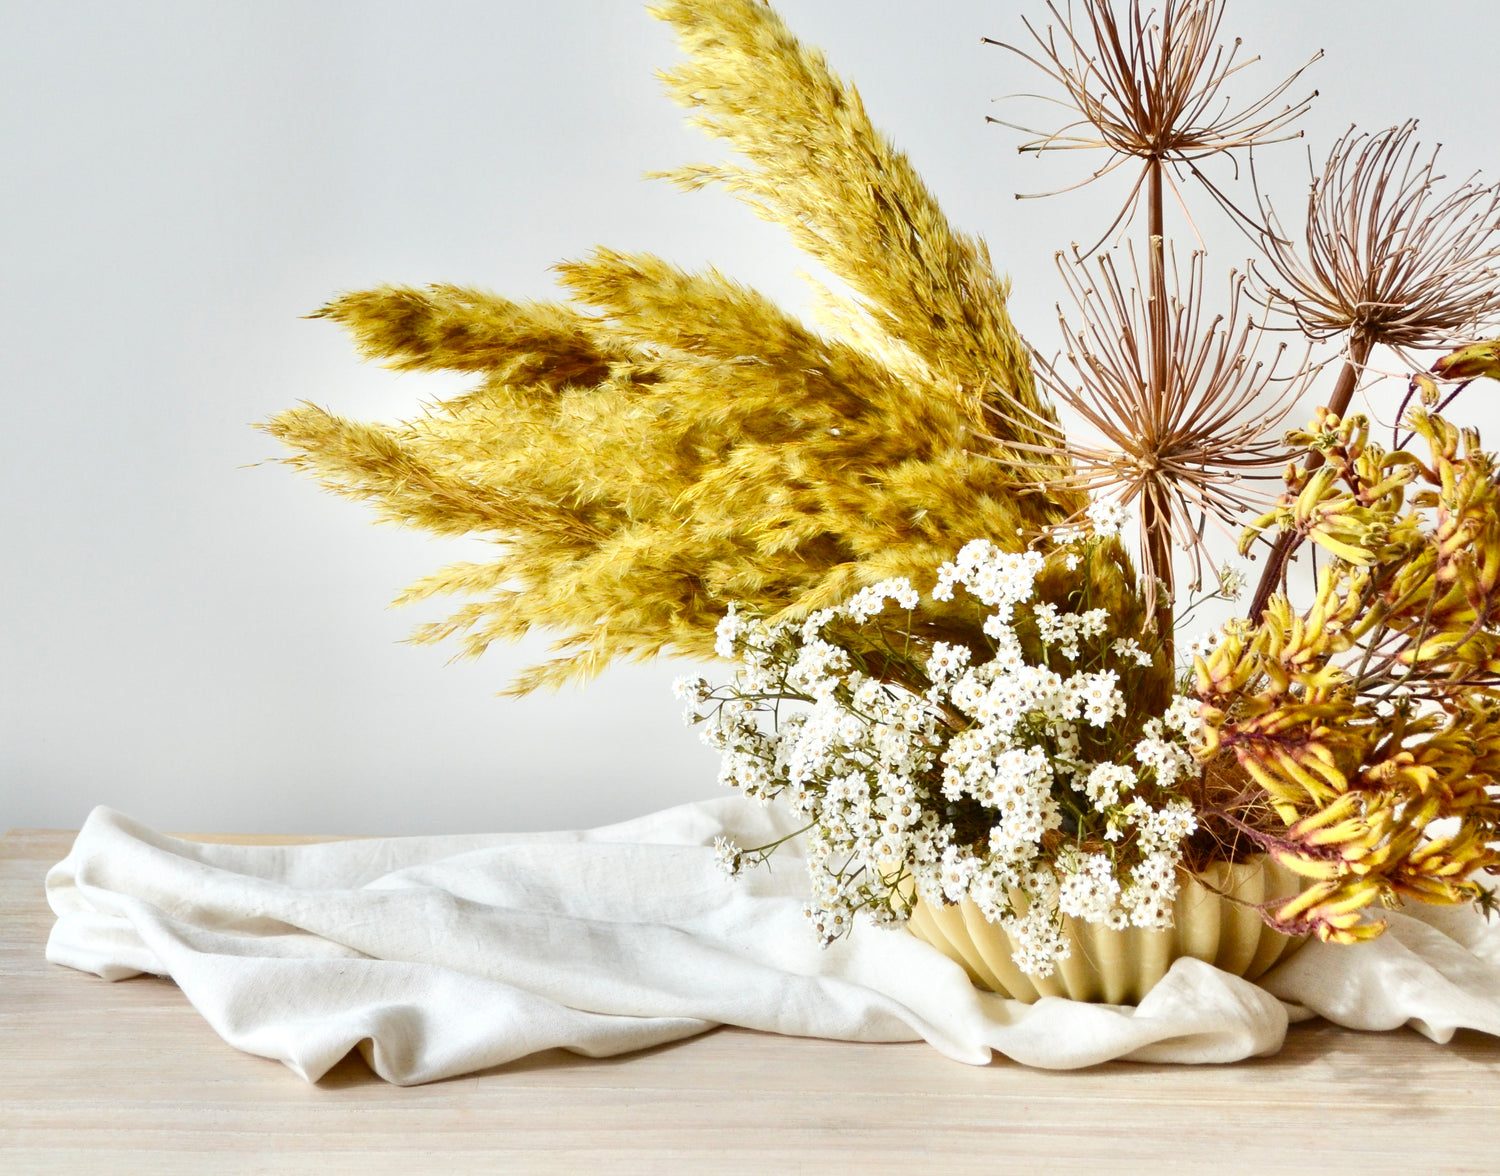 DRIED CORPORATE FLOWERS